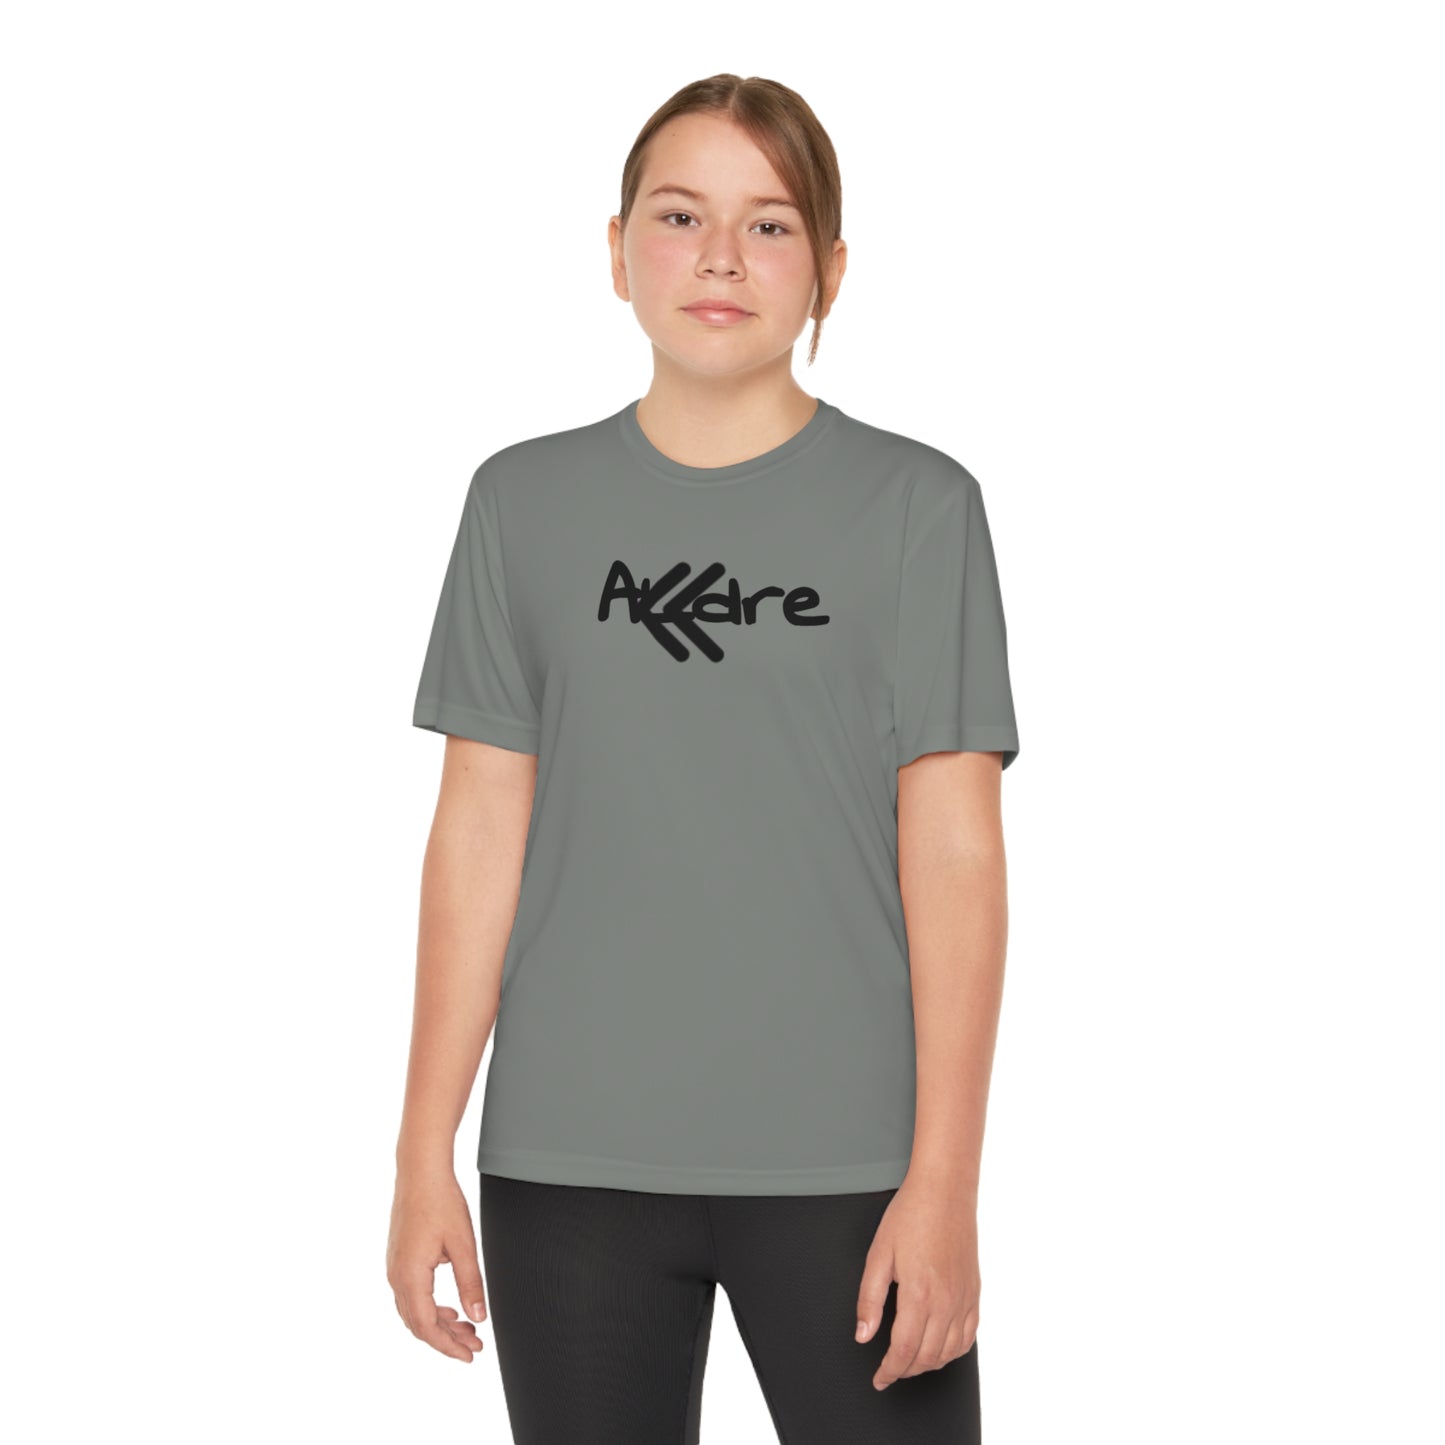 Youth Competitor Tee